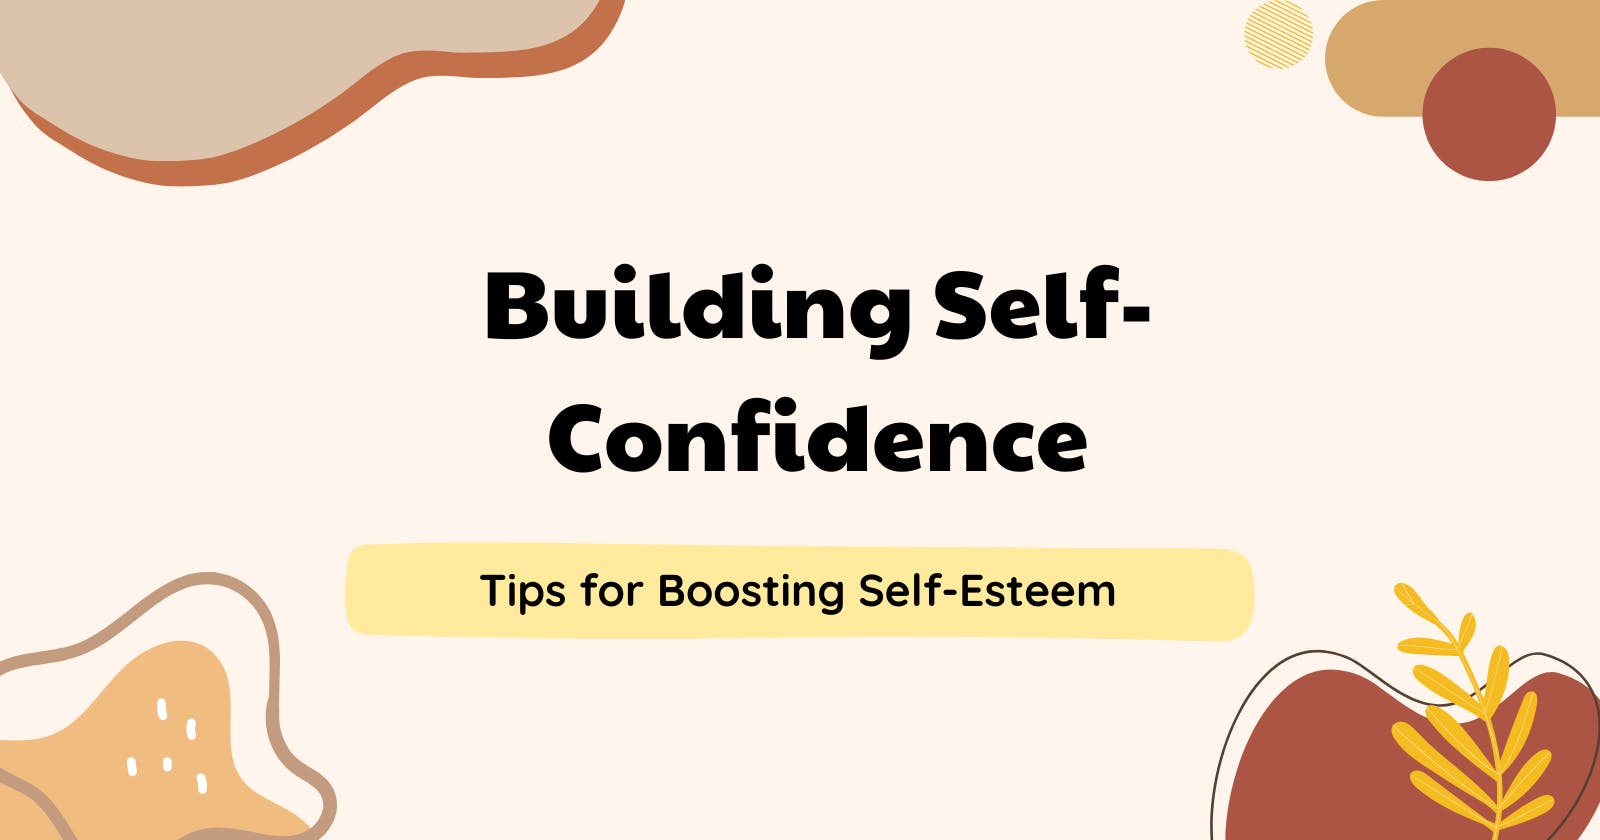 Techniques for Building Self-Confidence and Boosting Self-Esteem 💪